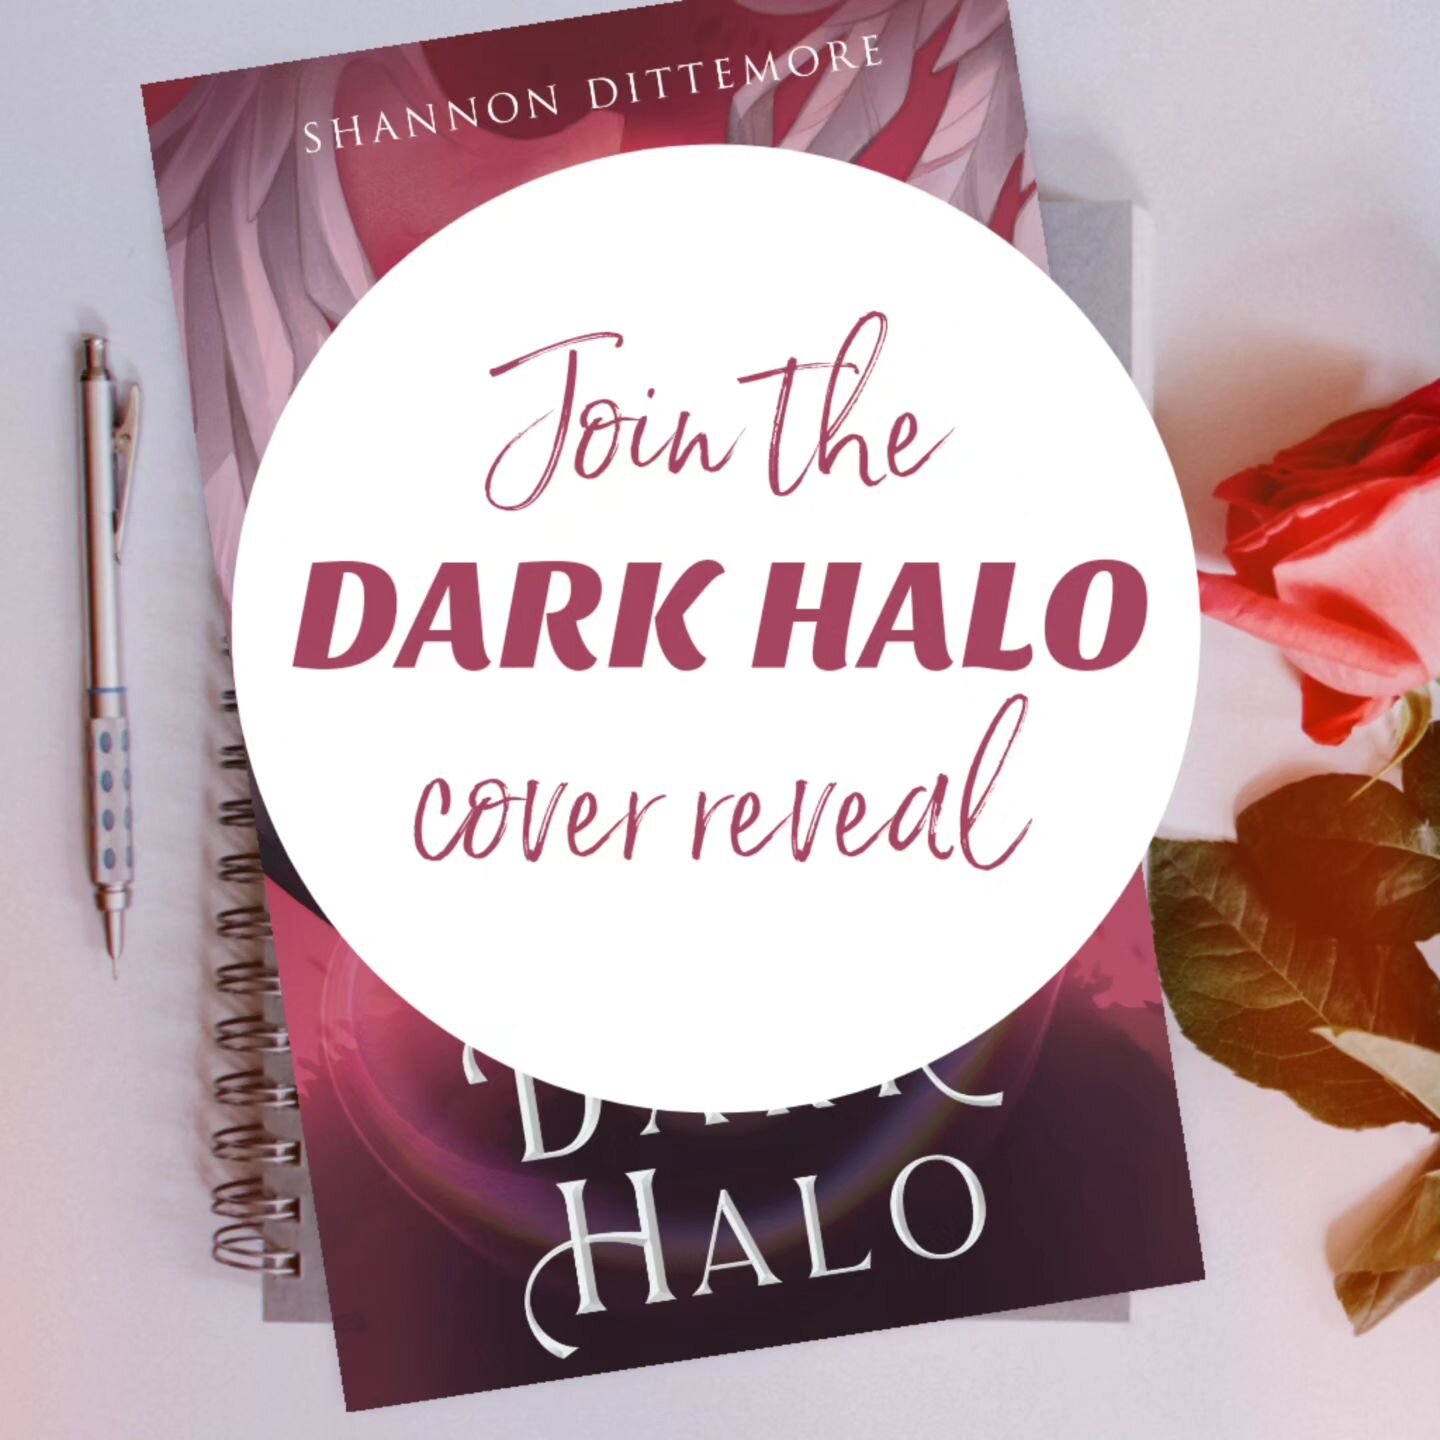 Cover reveal sign ups 💫 Link in bio

It's almost time to reveal the new cover for the third and final book in the #AngelEyesTrilogy, DARK HALO‼️

With artwork by Ireen Chau and design by Emilie Hendryx Haney, this cover is my absolute favorite of th